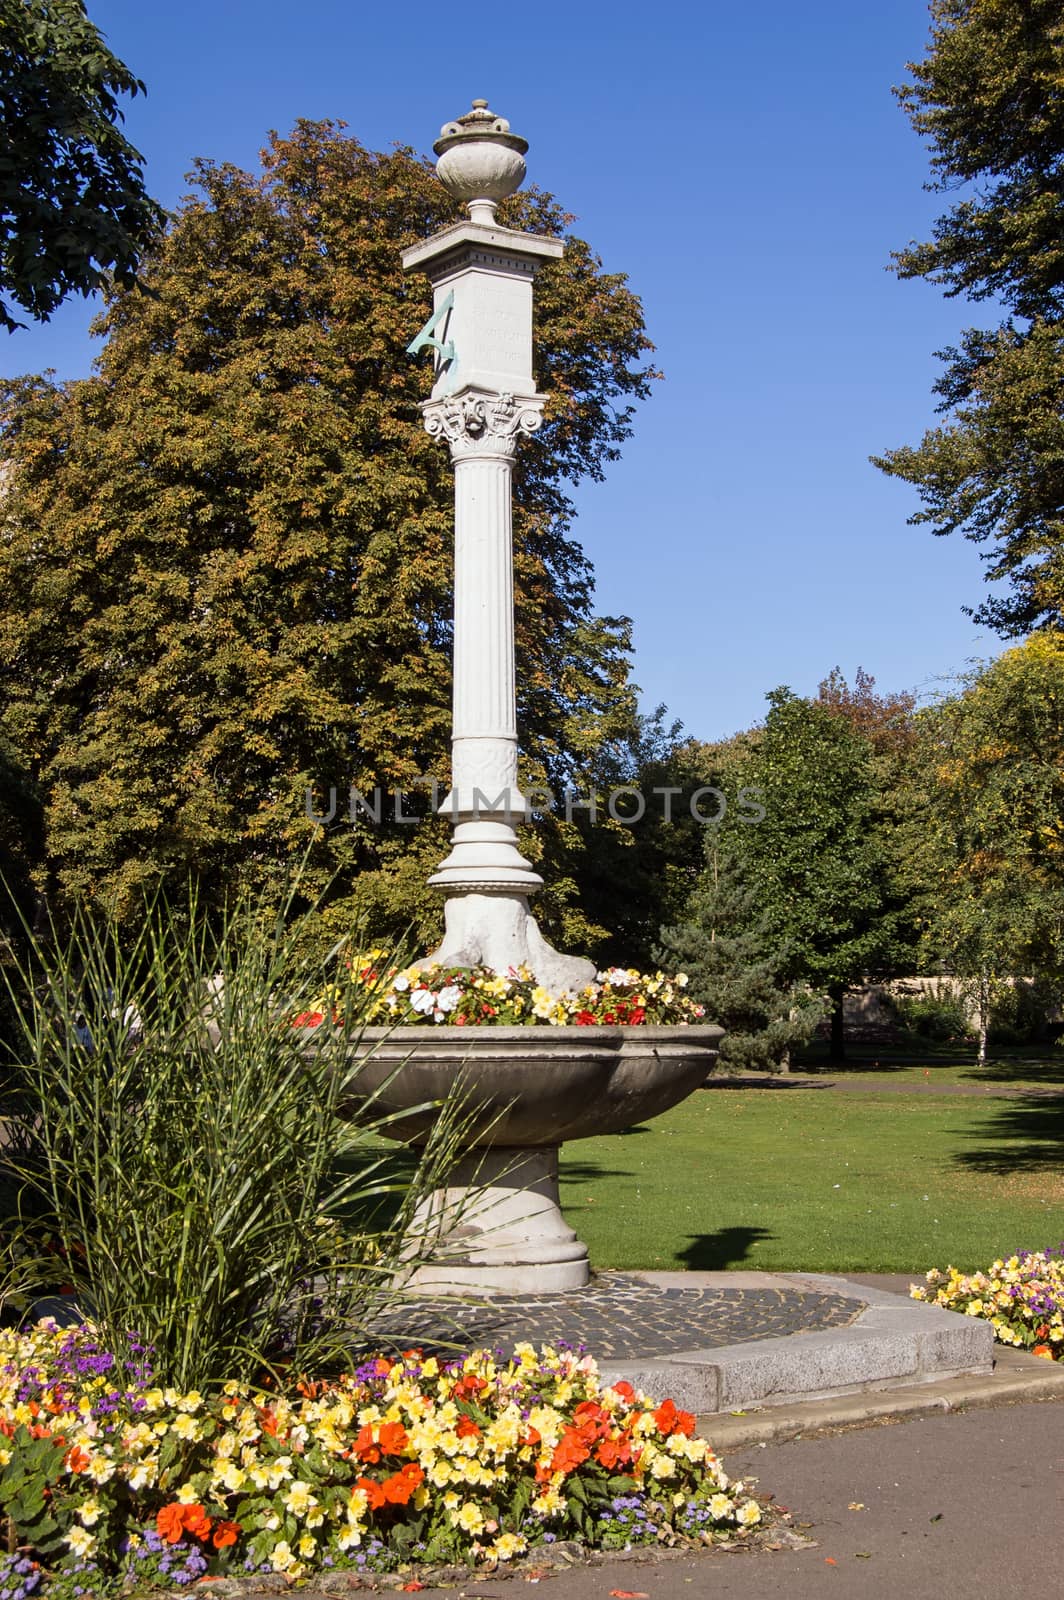 Victorian fountain, now used as a planter, in Abbey Gardens, Bury St Edmunds. The carved pillar with sundial was a gift from the Marquis of Bristol, unveiled in 1871.